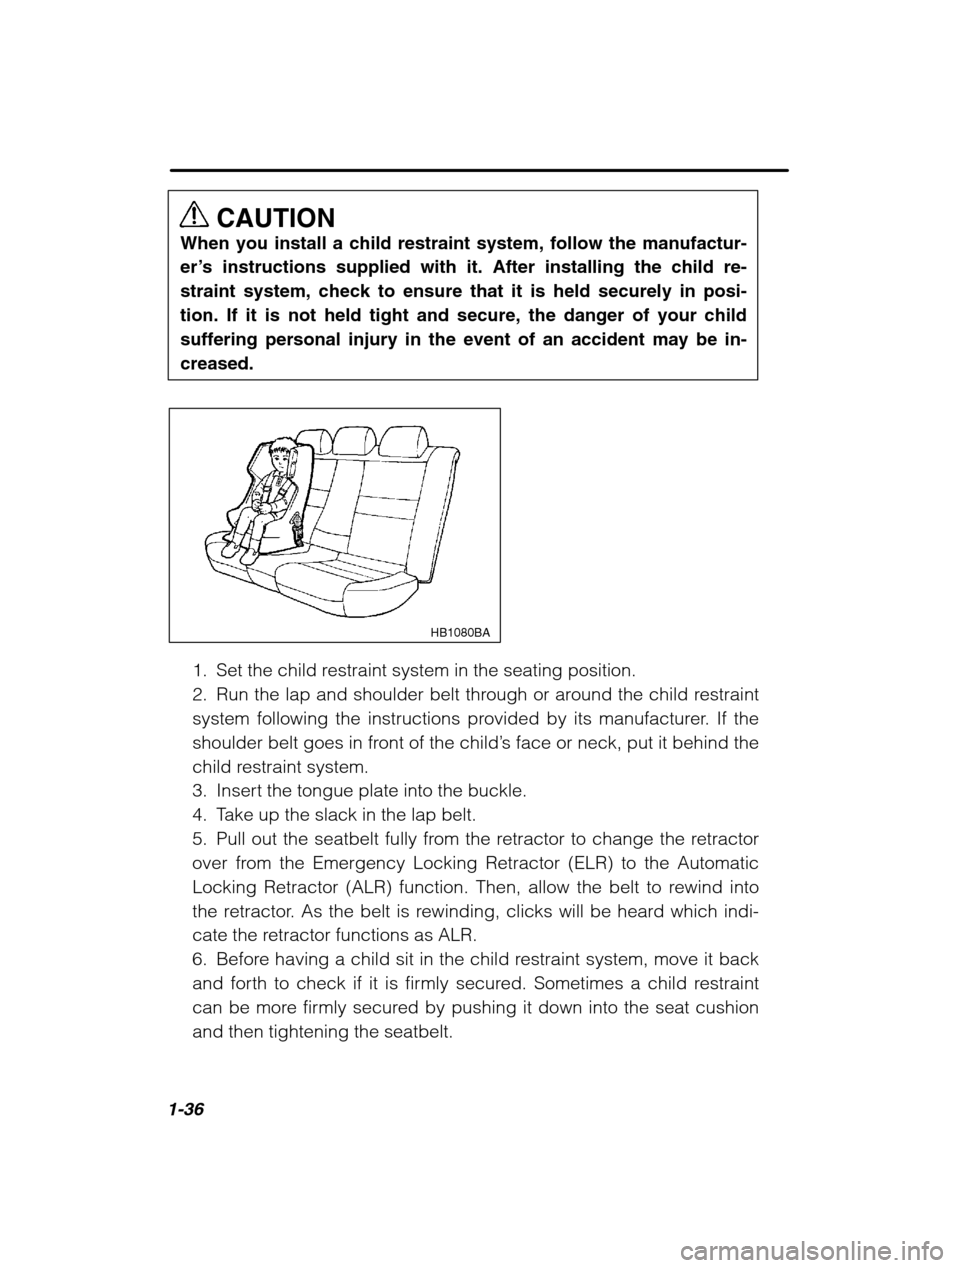 SUBARU LEGACY 2002 3.G Service Manual 1-36
CAUTION
When you install a child restraint system, follow the manufactur- 
er’ s instructions supplied with it. After installing the child re-
straint system, check to ensure that it is held se